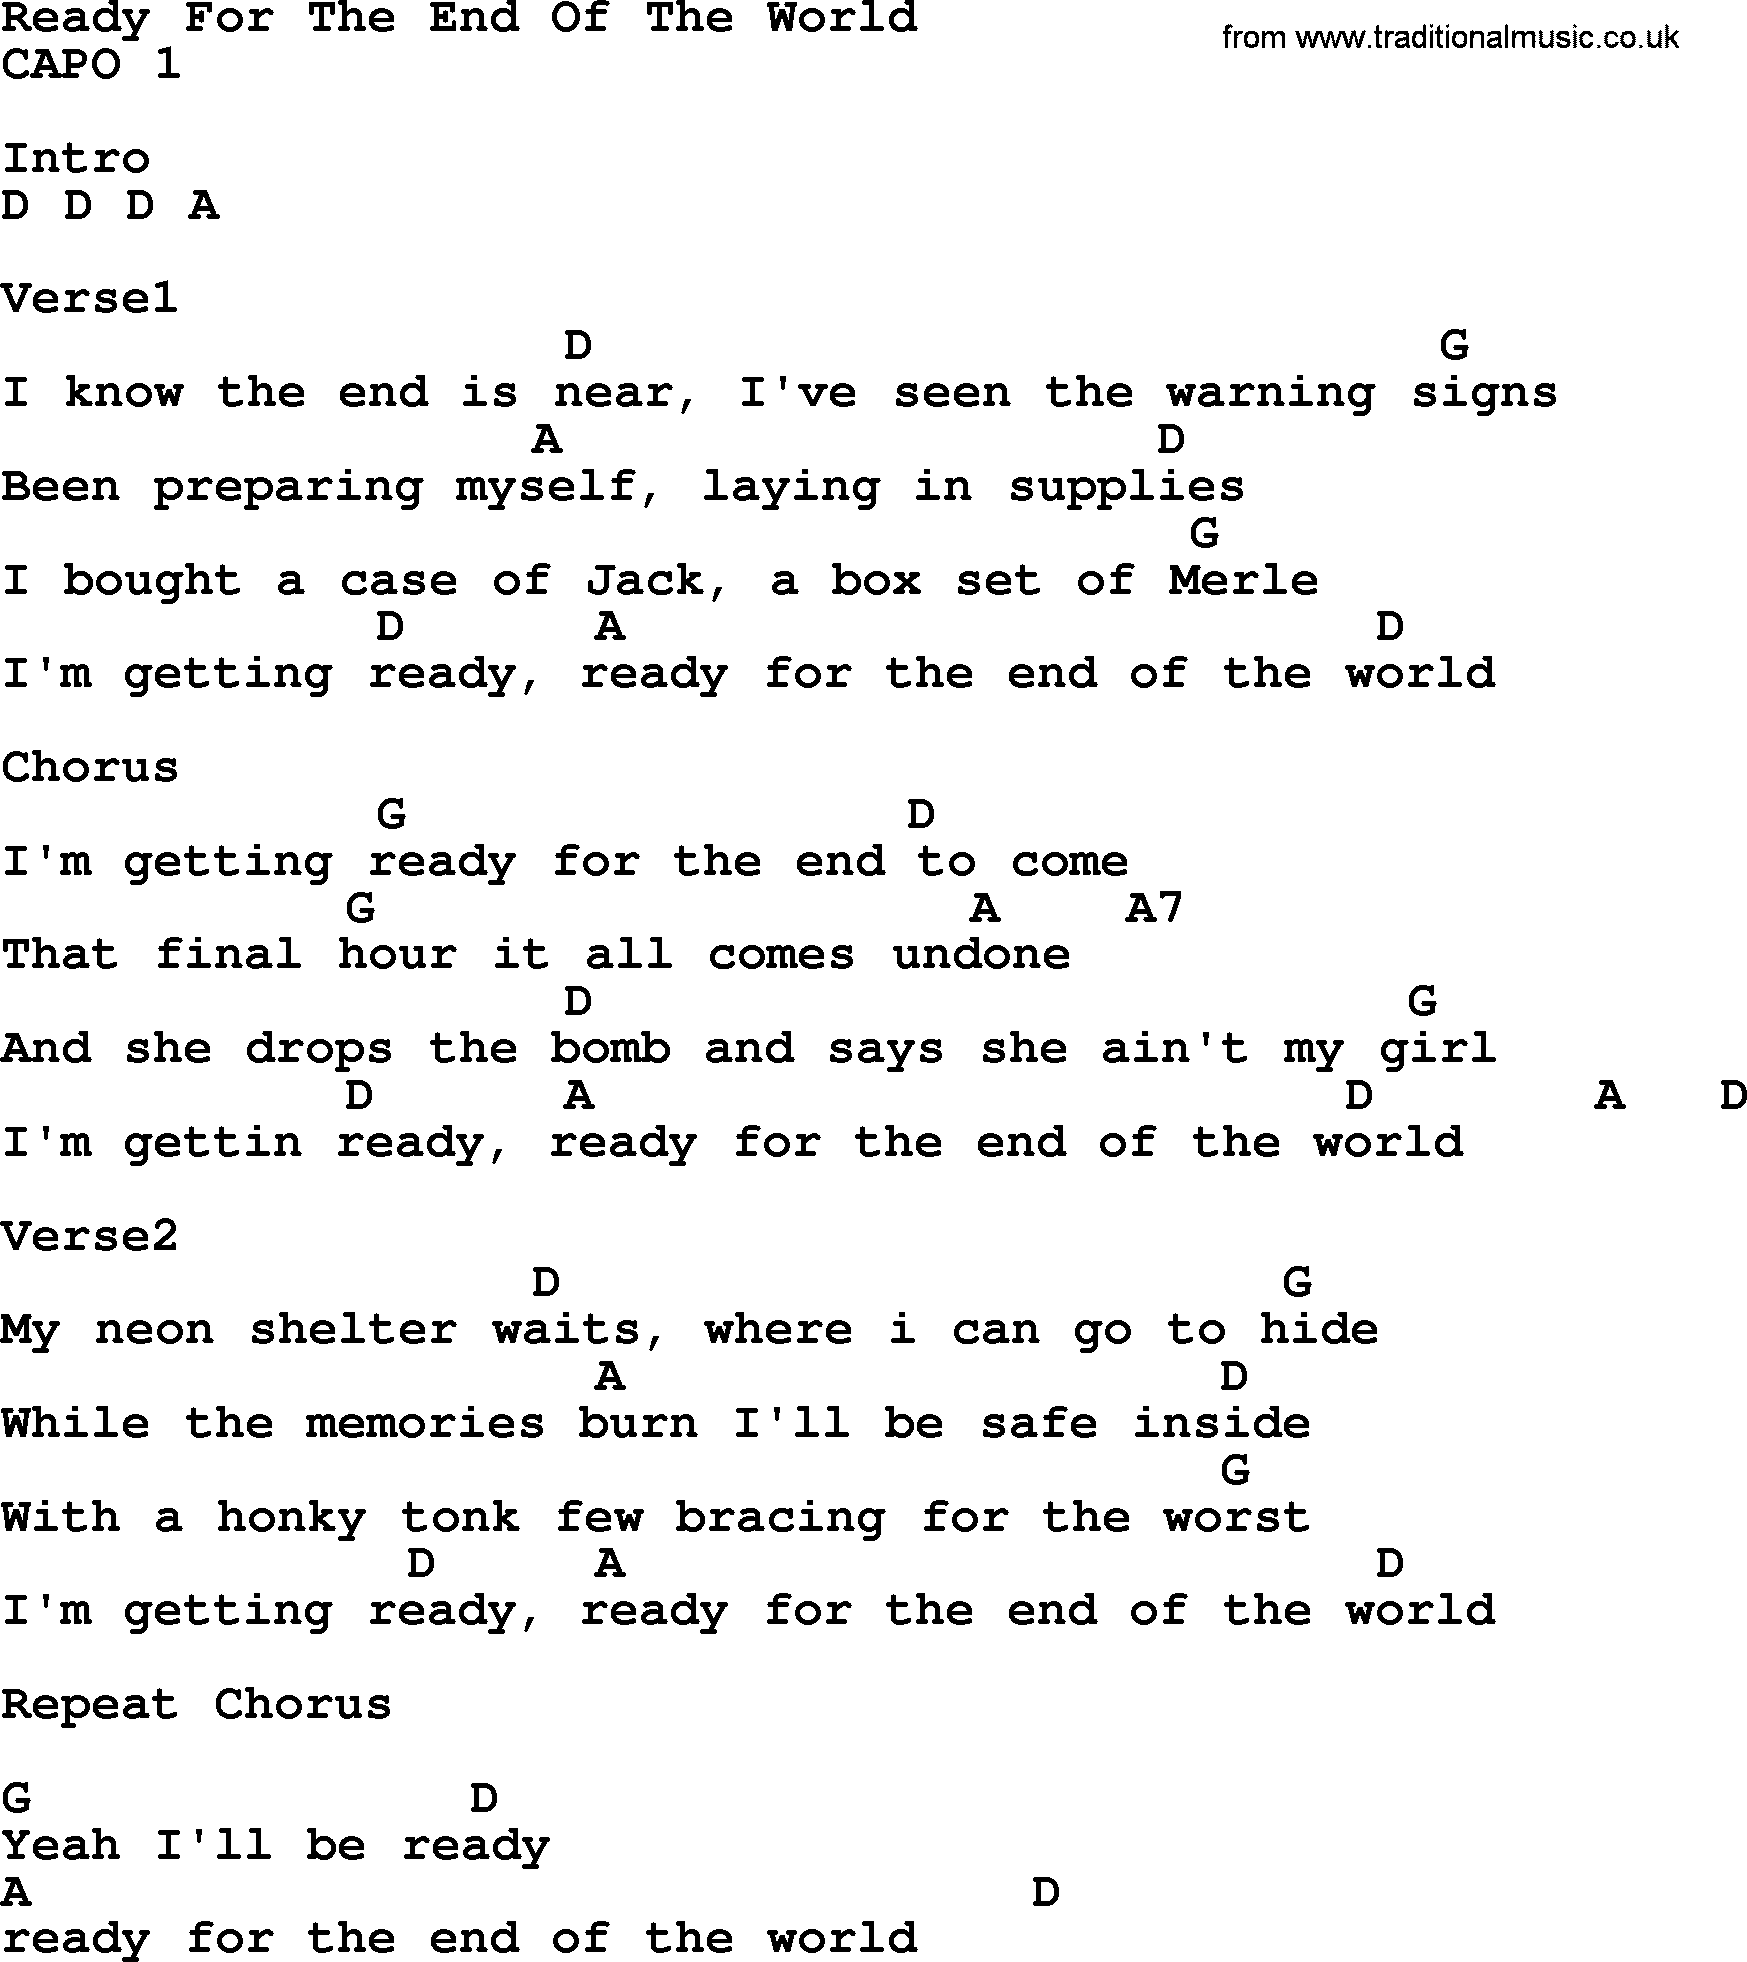 George Strait song: Ready For The End Of The World, lyrics and chords